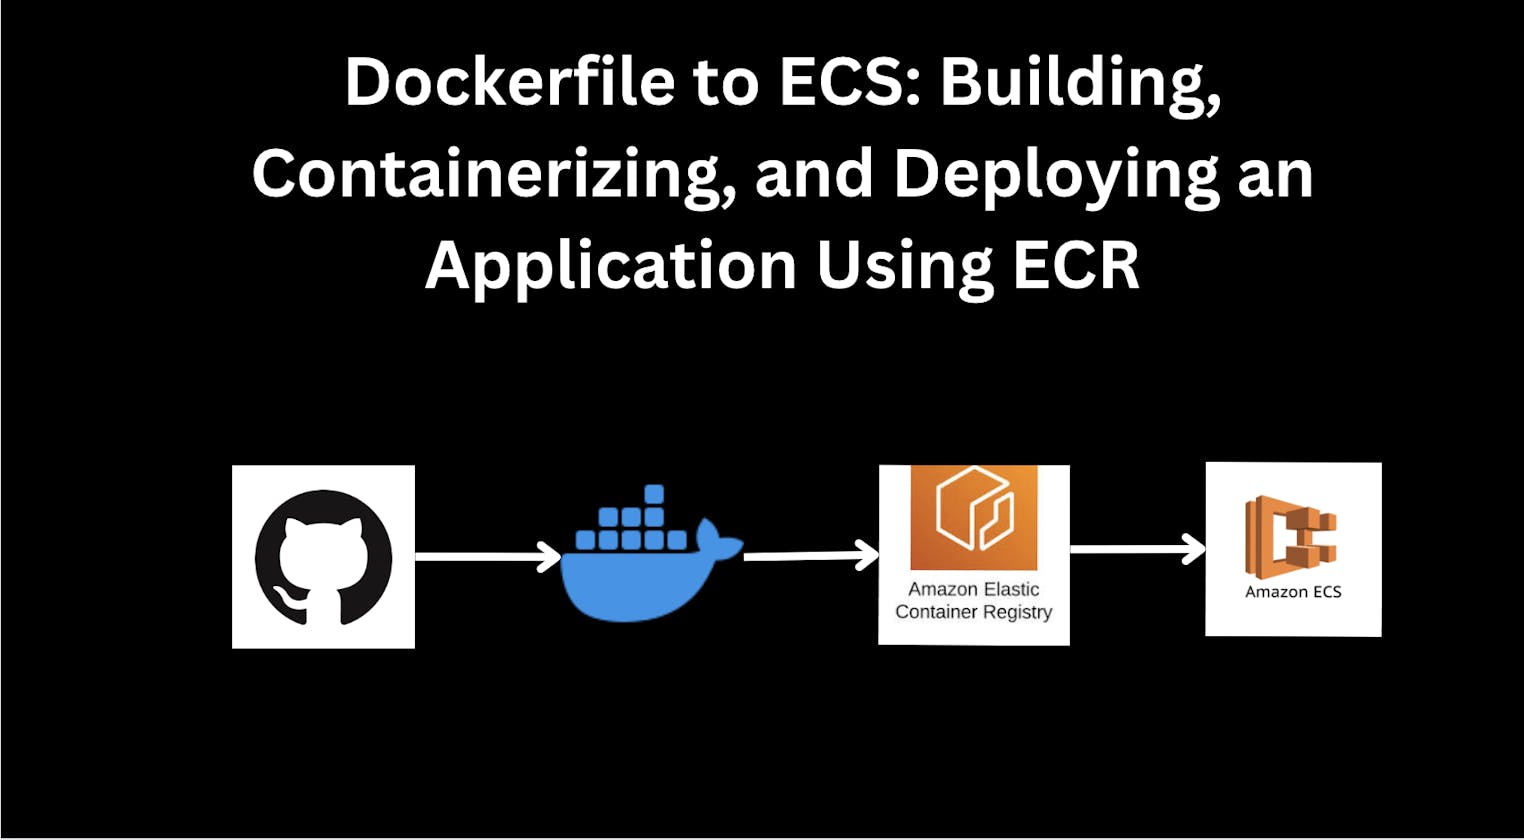 From Dockerfile to ECS: Building, Containerizing, and Deploying an Application Using ECR